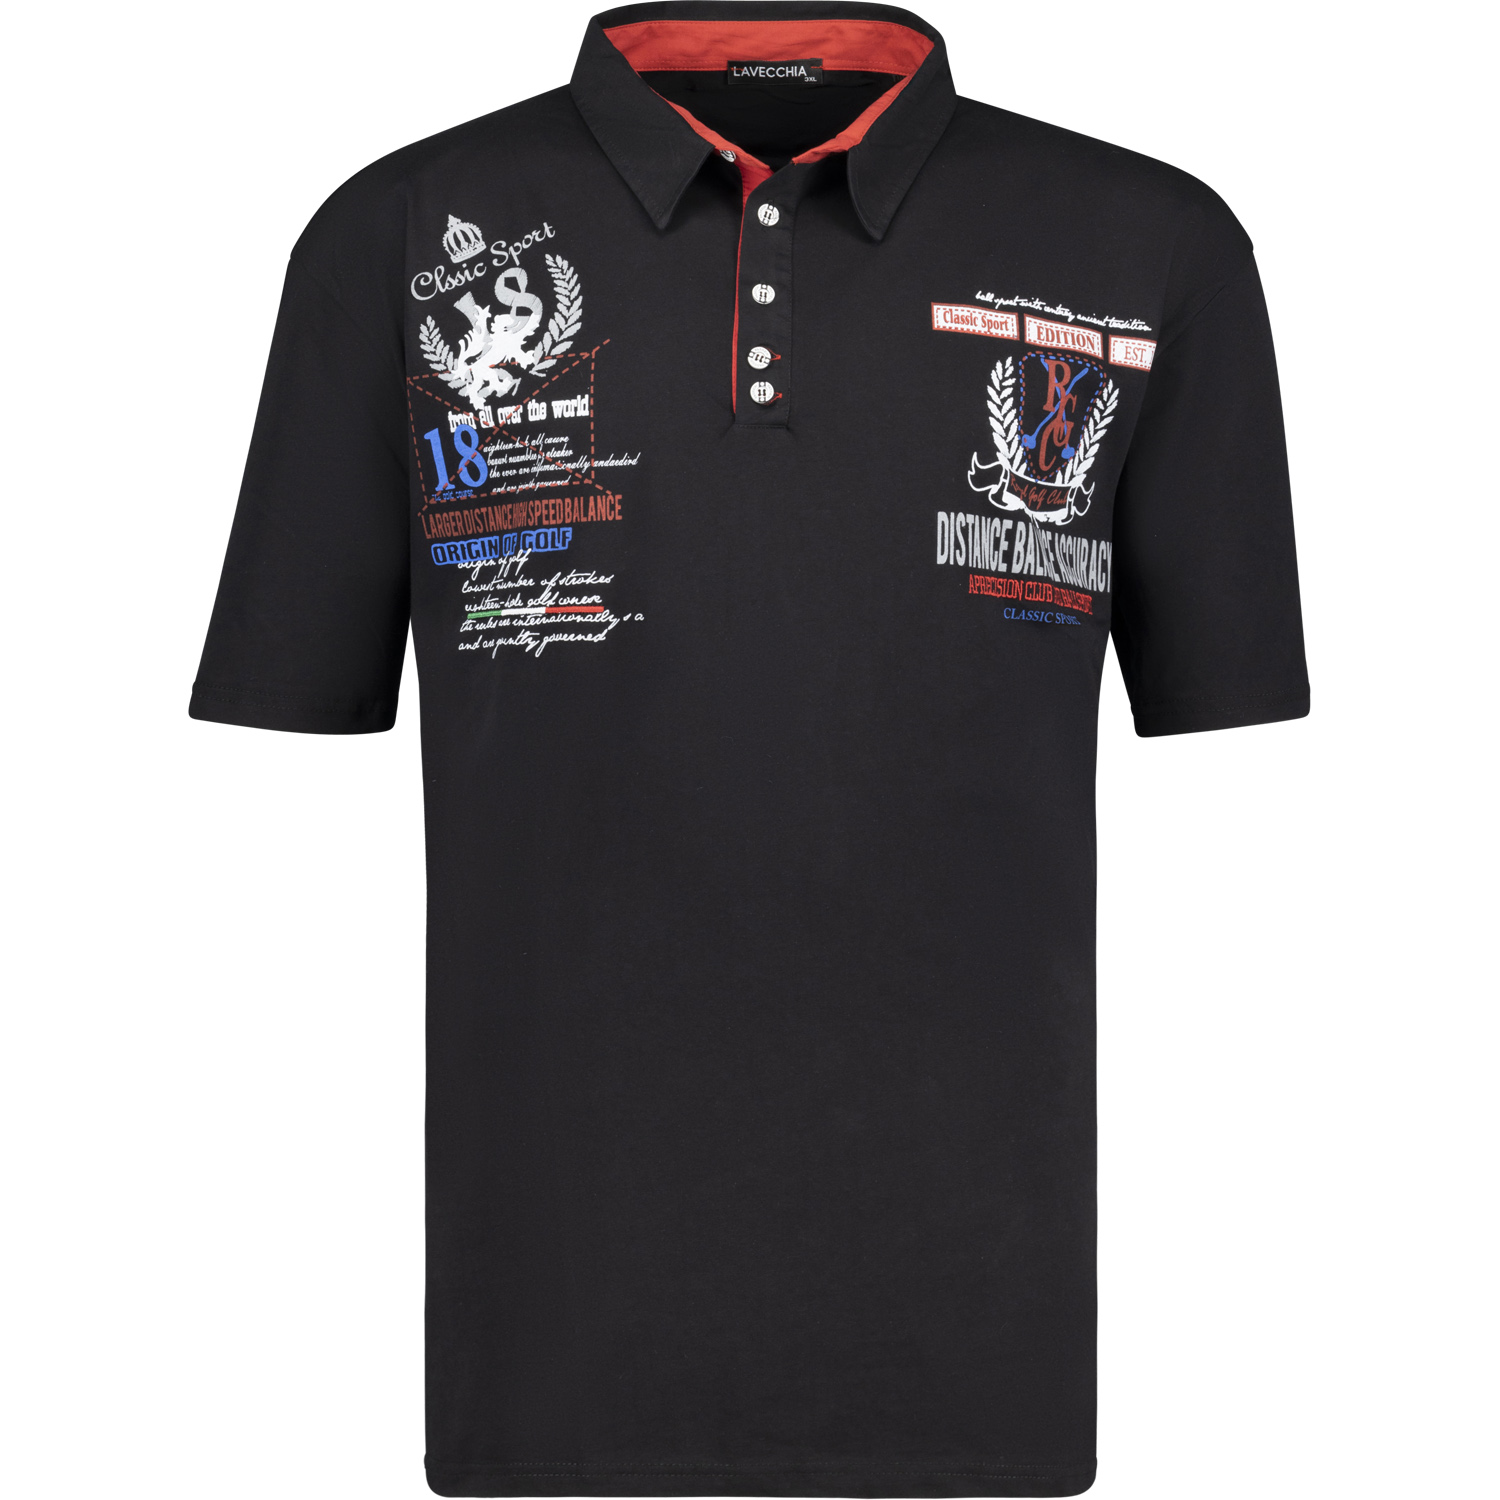 Polo shirt in black by Lavecchia in extra large sizes until 8XL